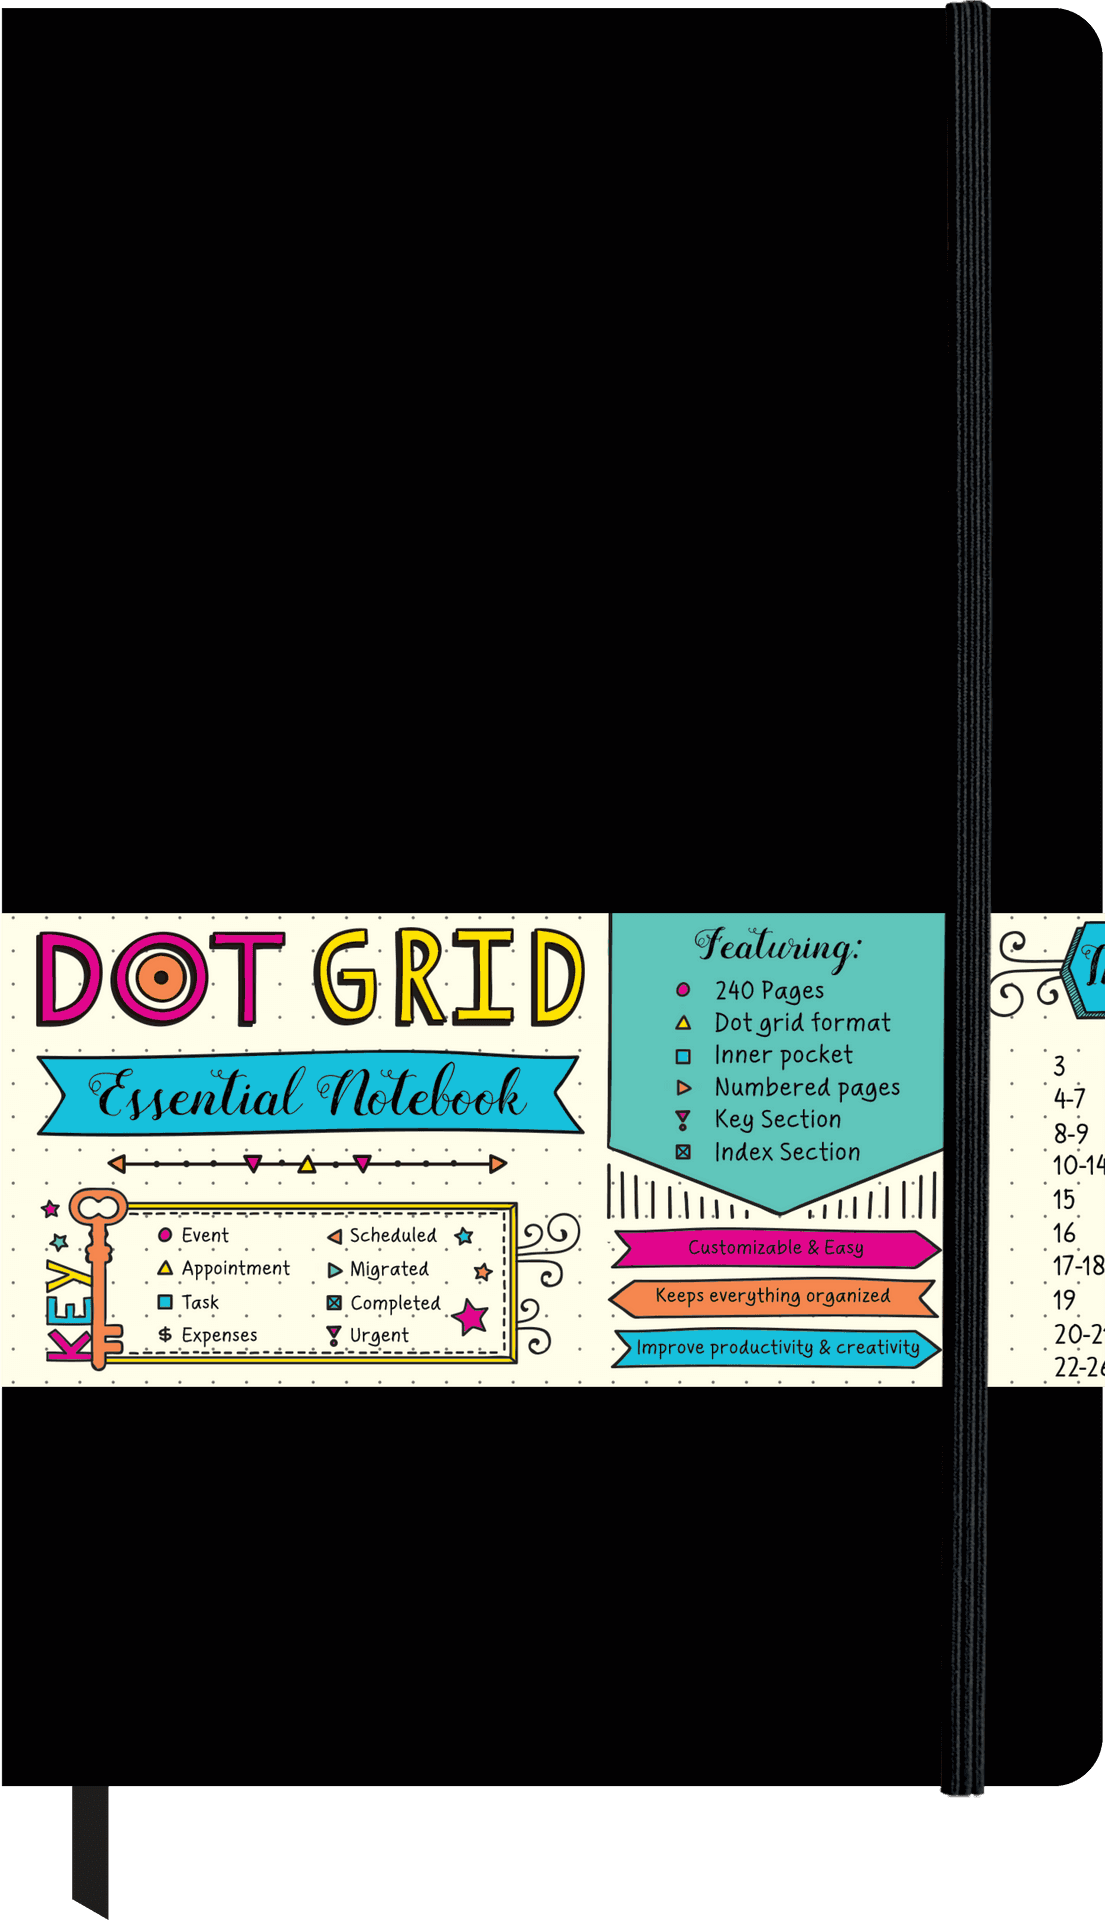 Dot Grid Essential Notebook Cover PNG